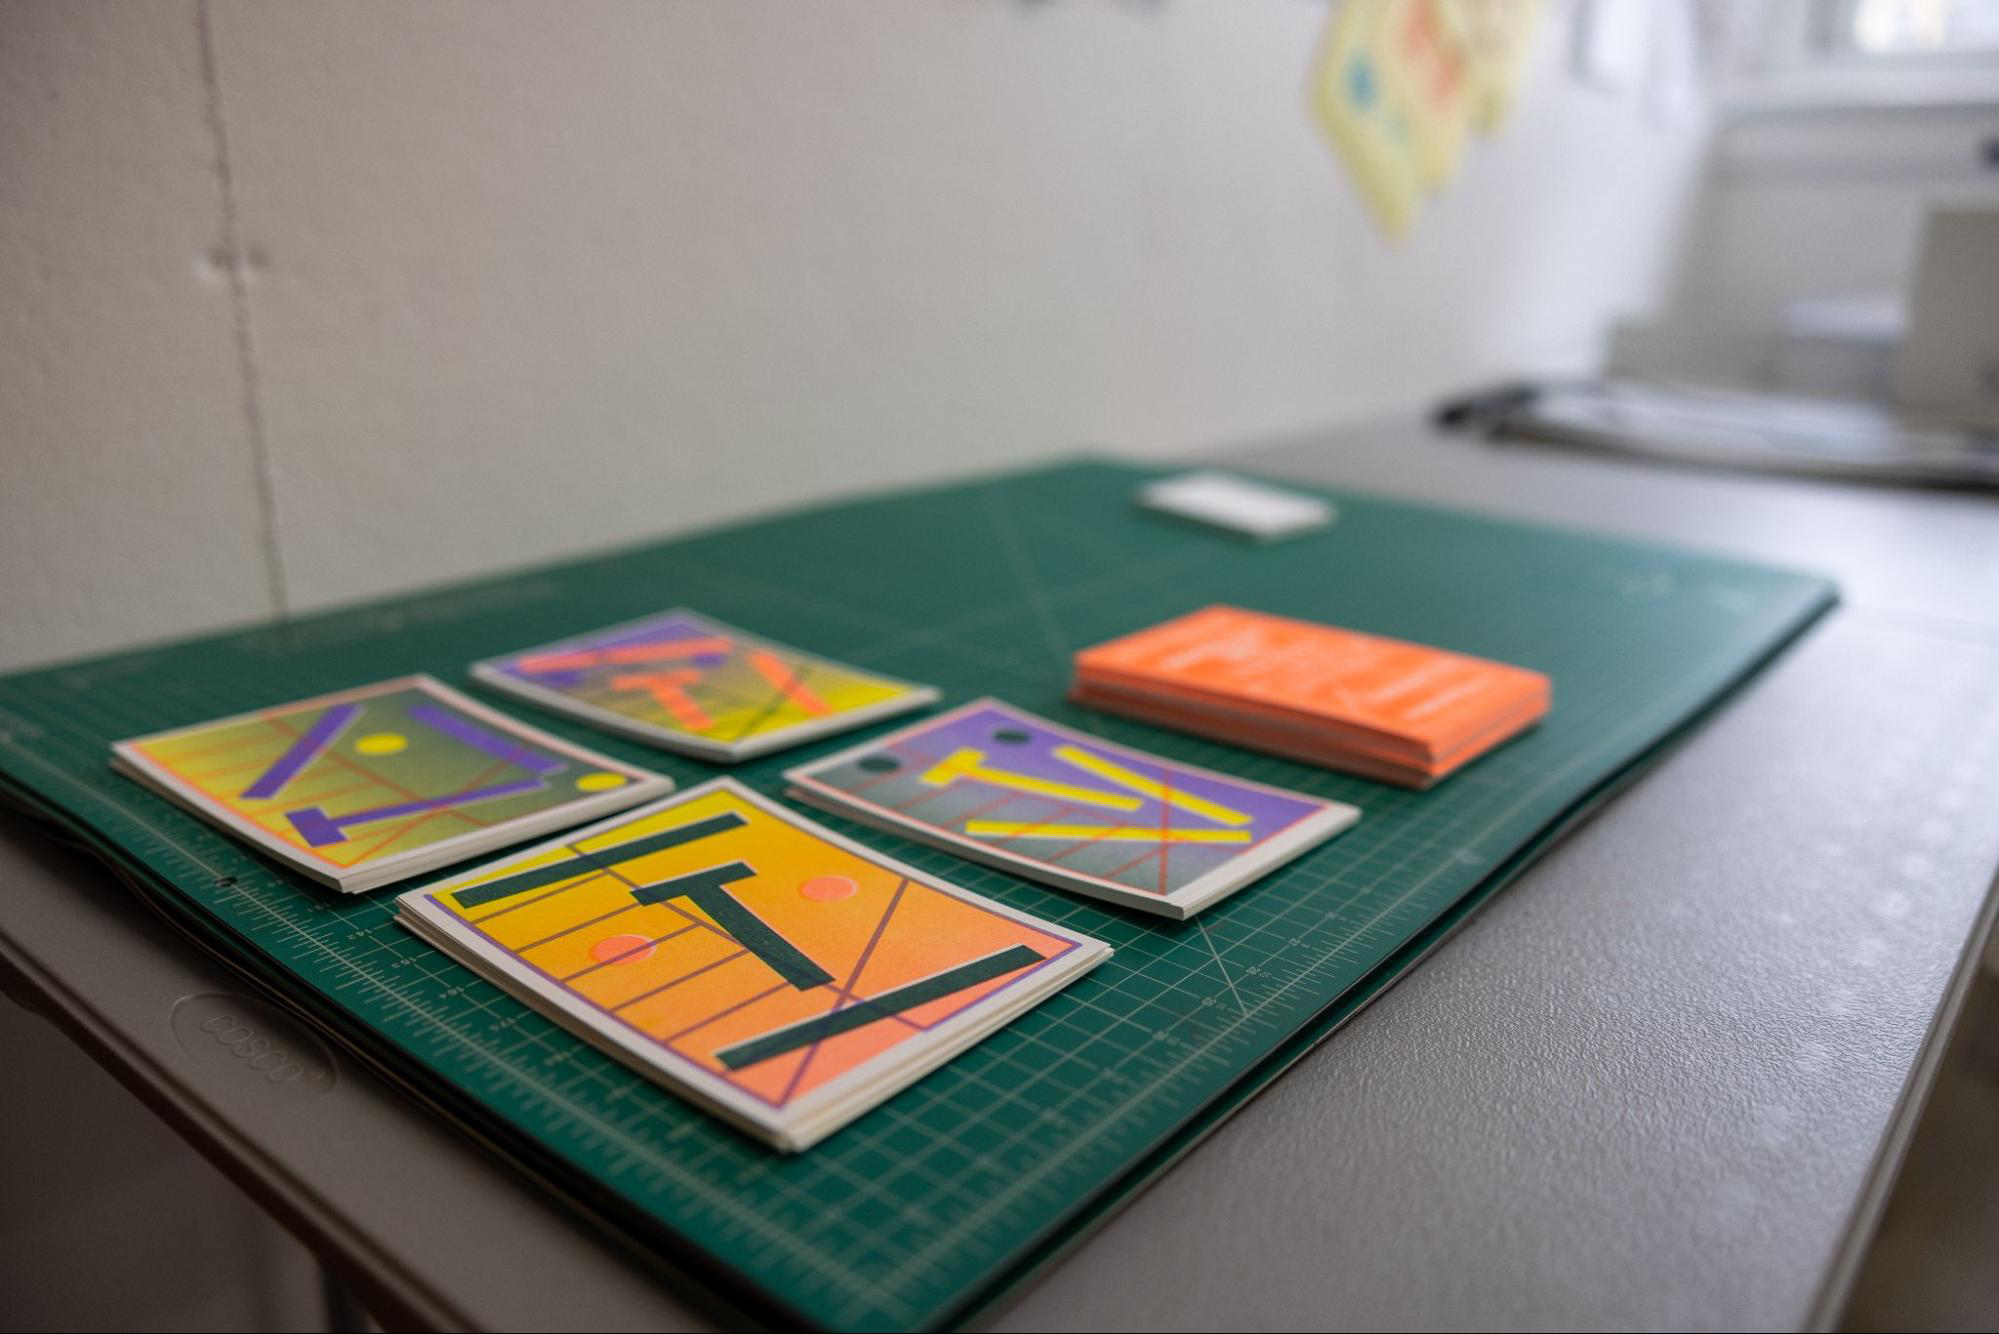 Brightly colored posters stacked on top of a green cutting mat.